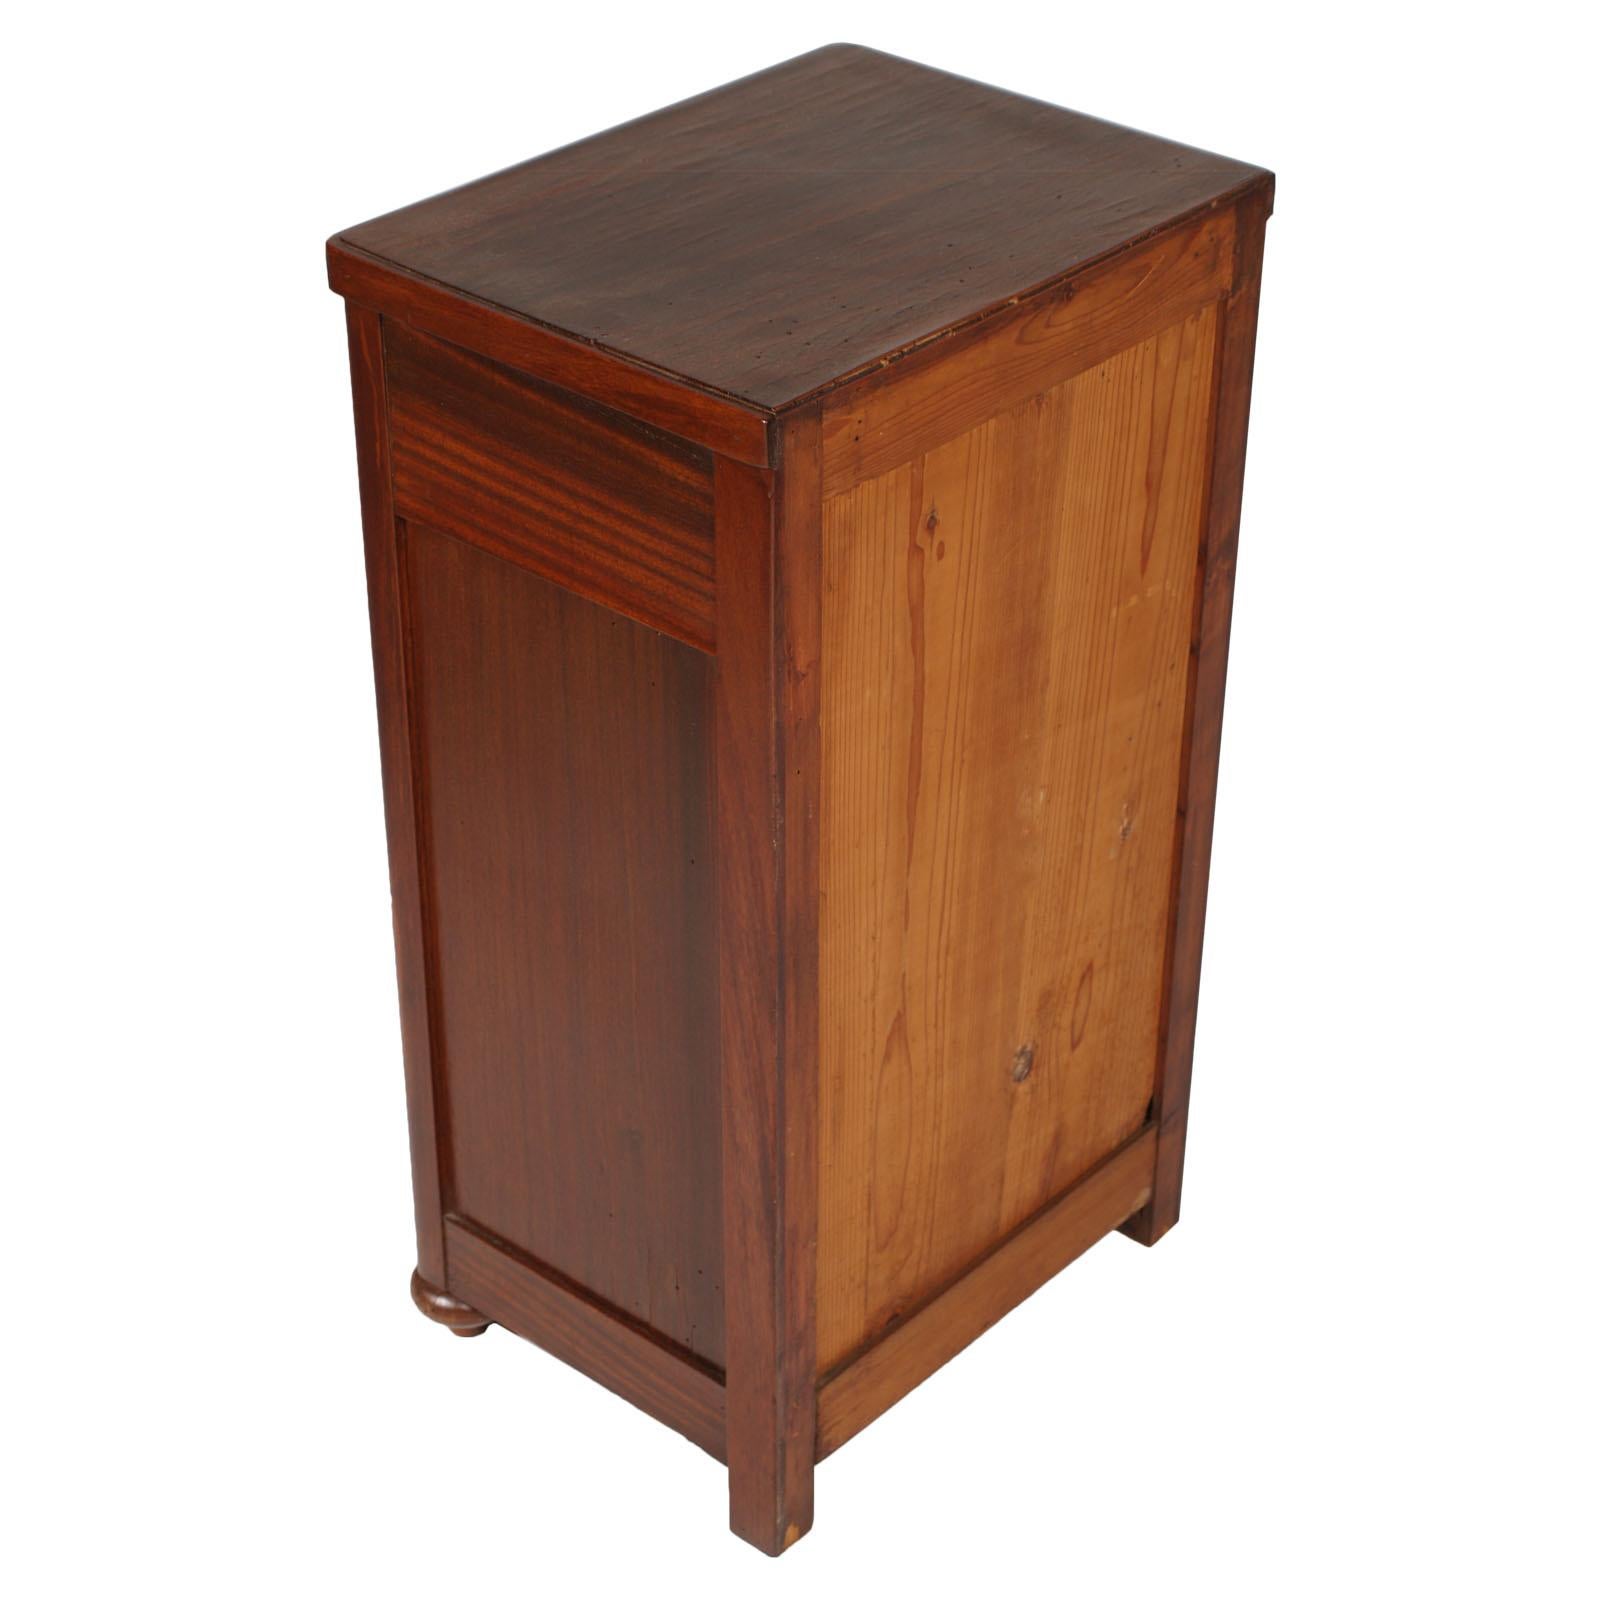 20th Century 1900s Rustic Country Nightstand, Bedside Table, Walnut and Mahogany, Restored For Sale